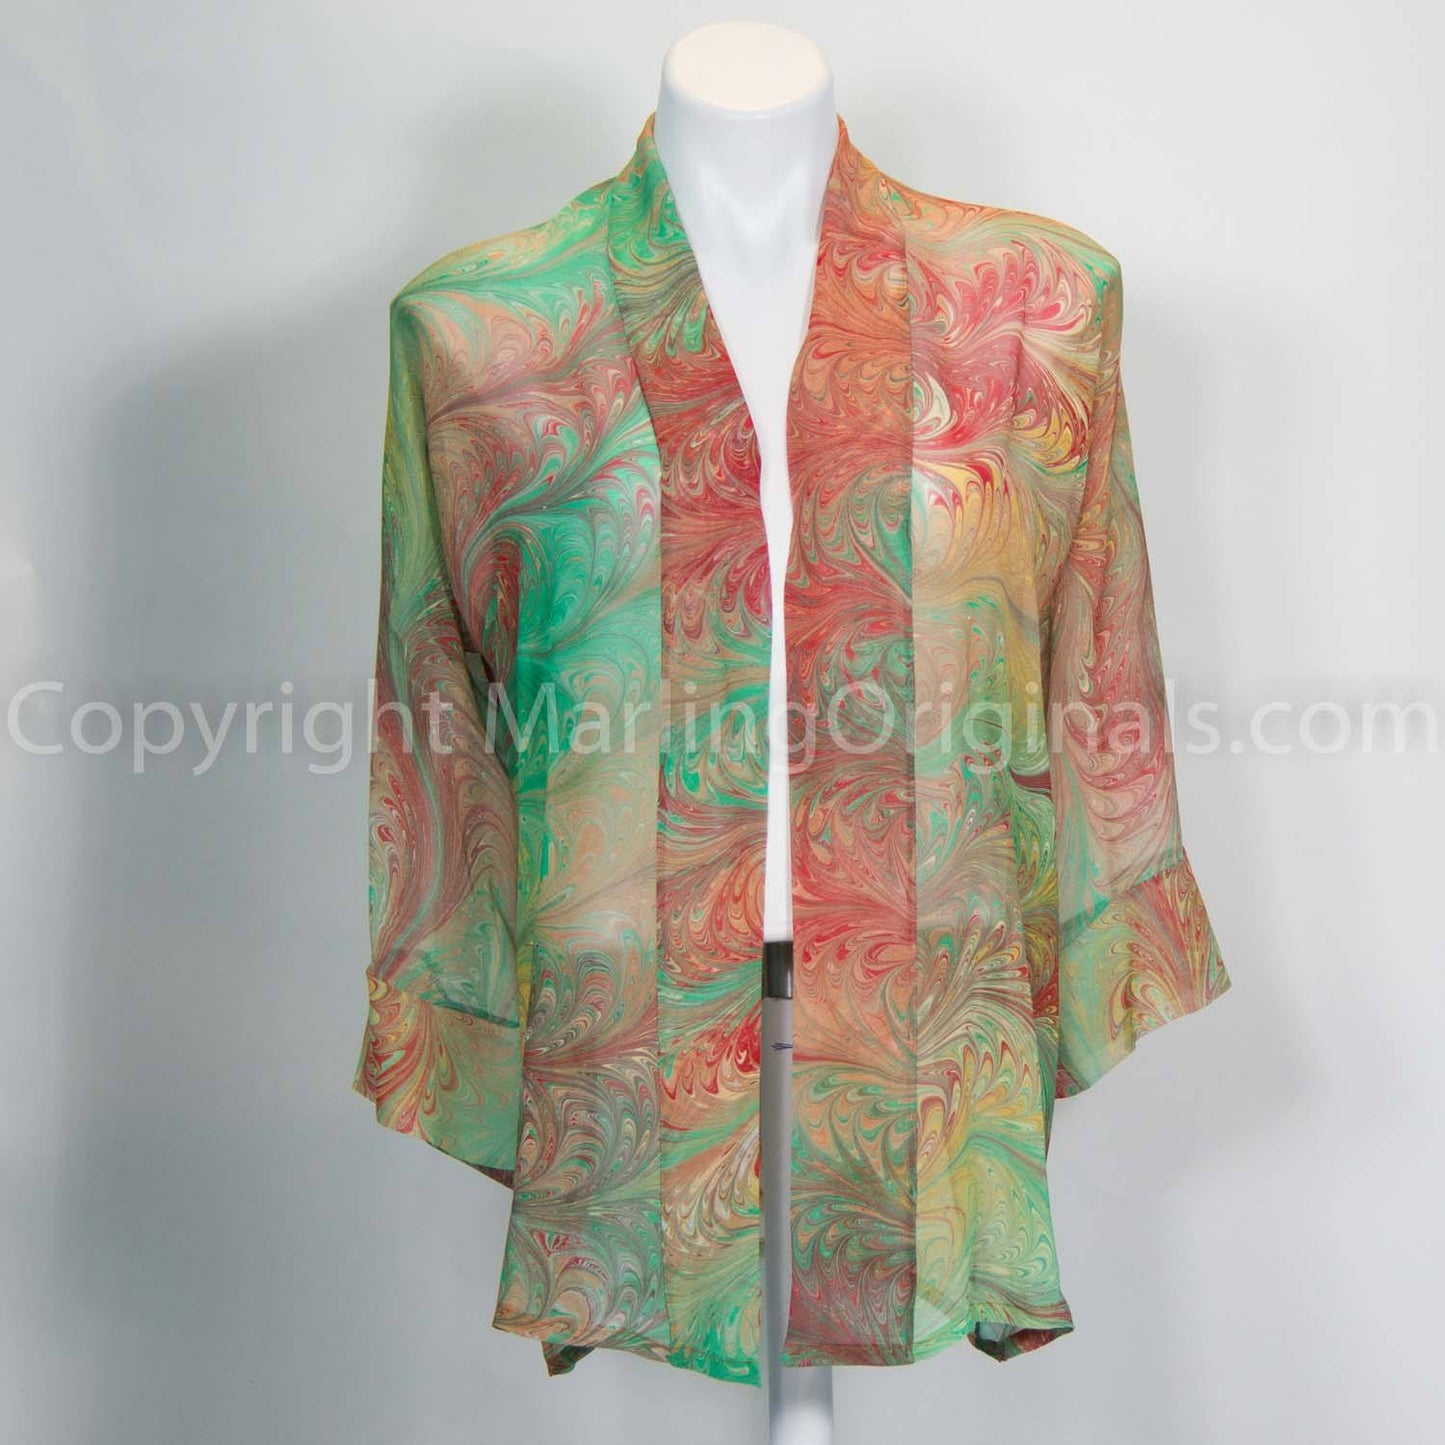 Hand marbled silk kimono in spring green, red, sienna and gold.  Sheer jacket has banded front.